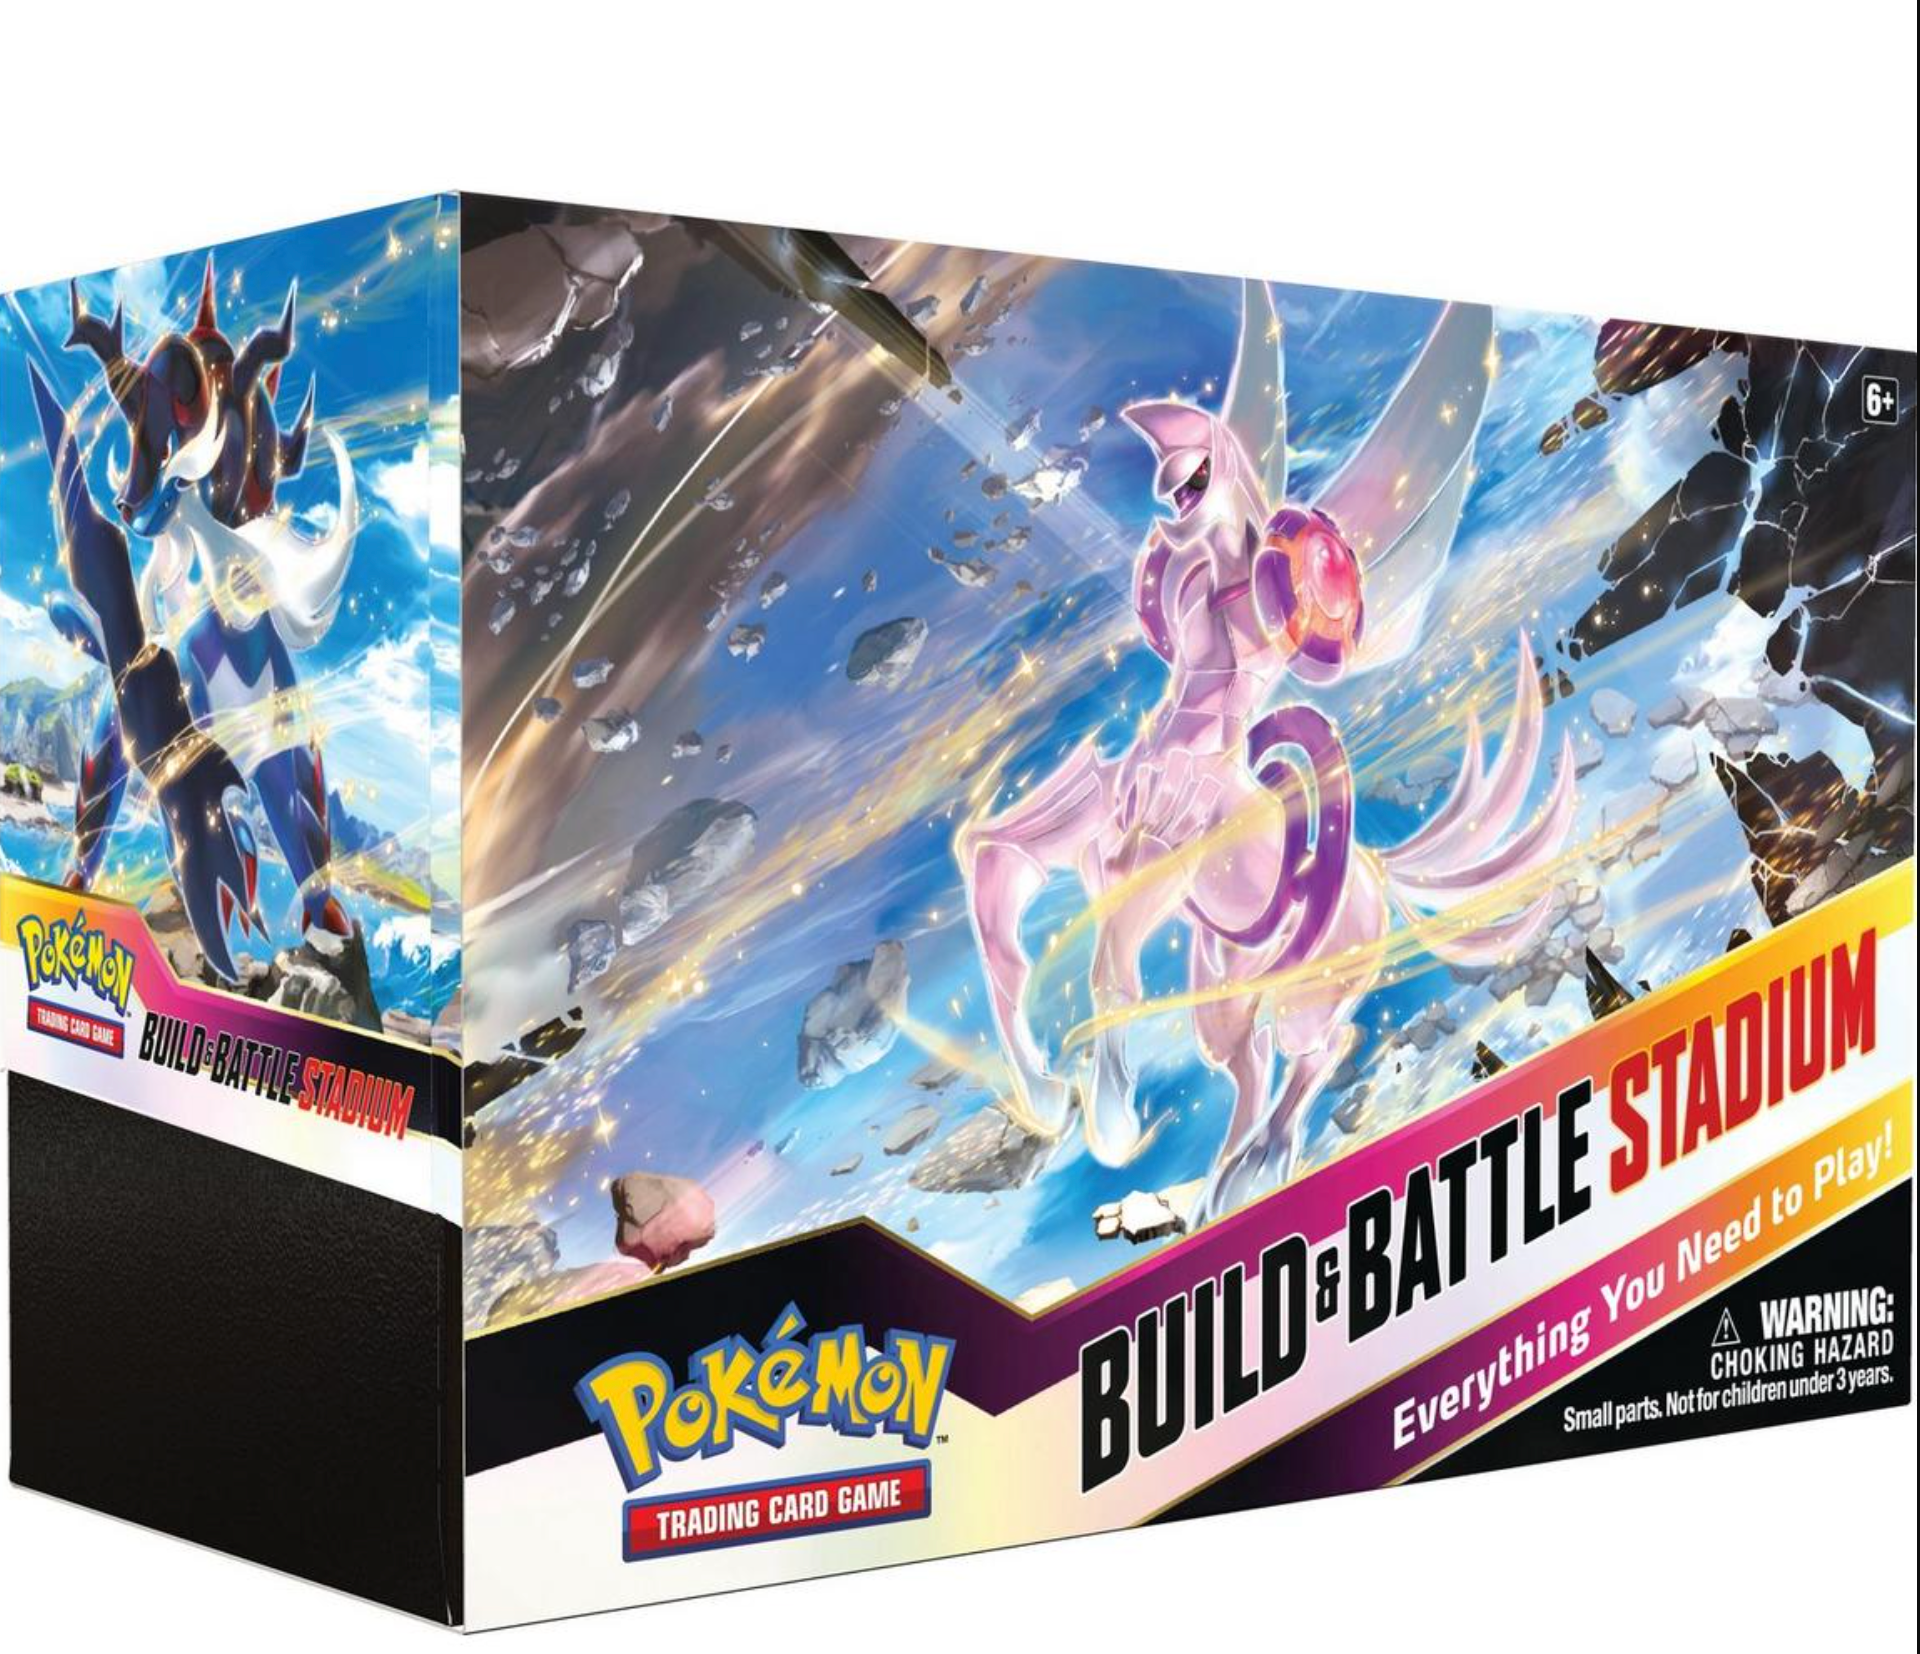 Pokemon Trading Card Game: Sword and Shield-Astral Radiance Build and Battle Stadium Set